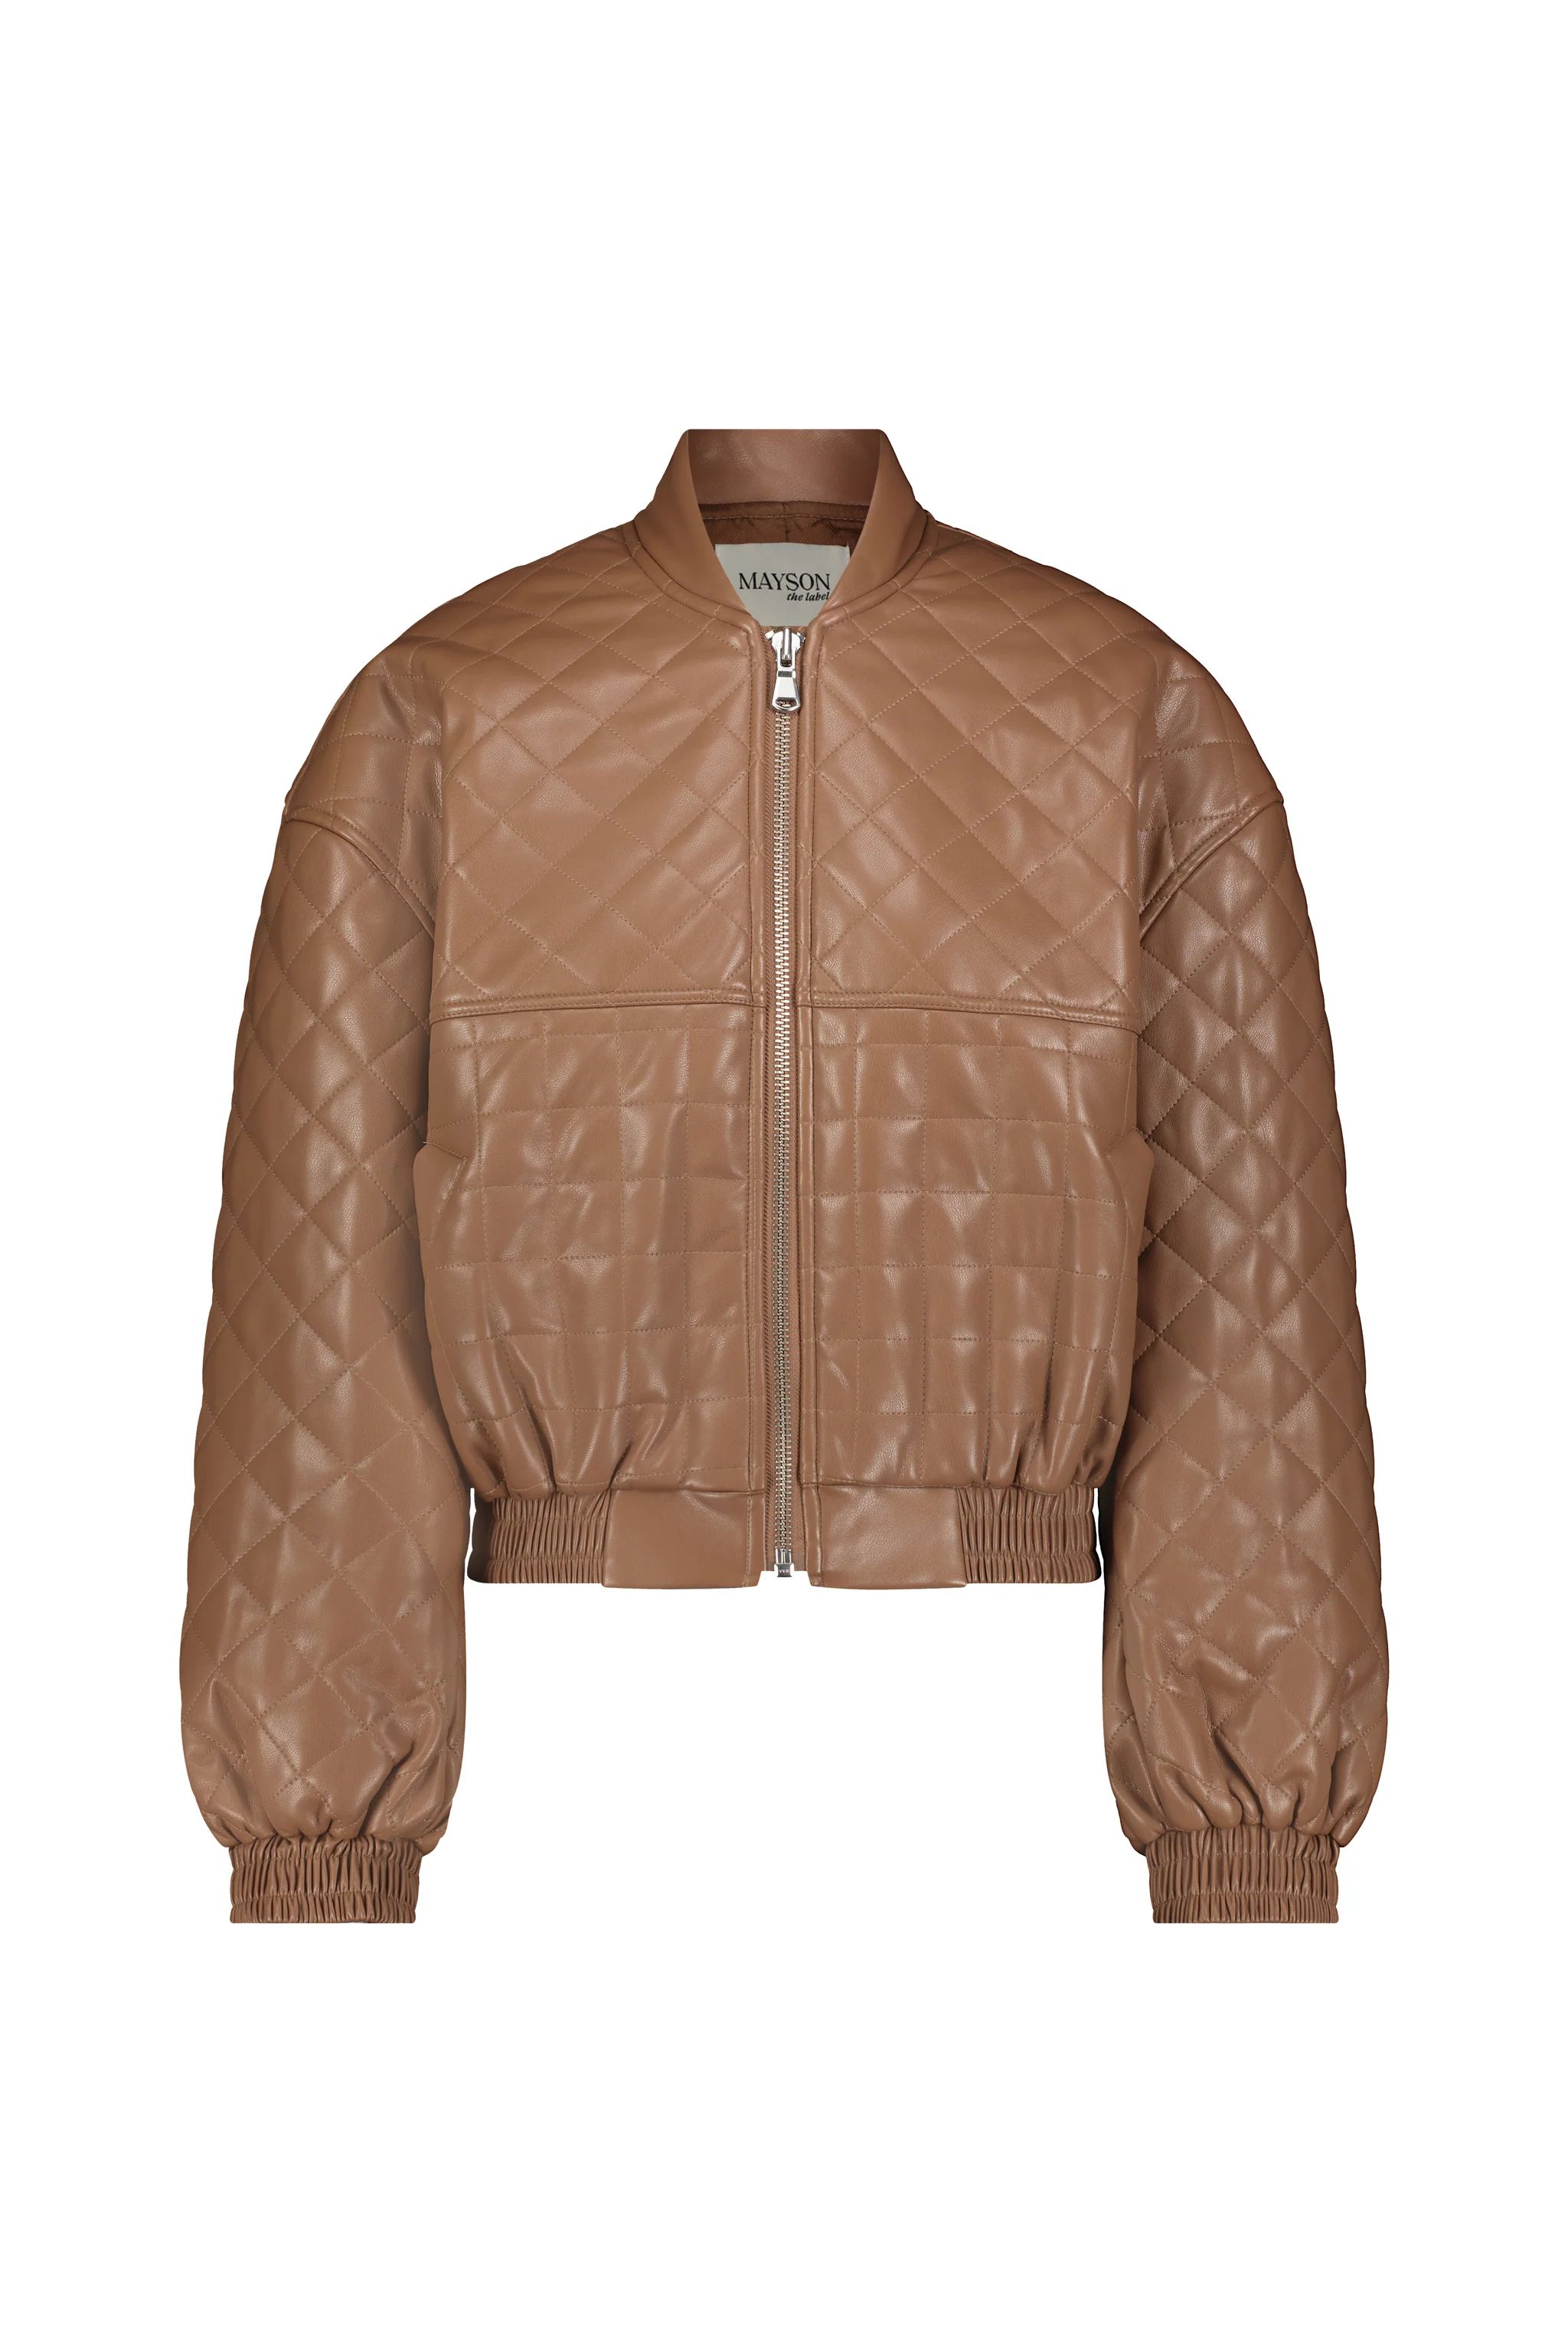 Quilted Vegan Leather Bomber Jacket | MAYSON the label